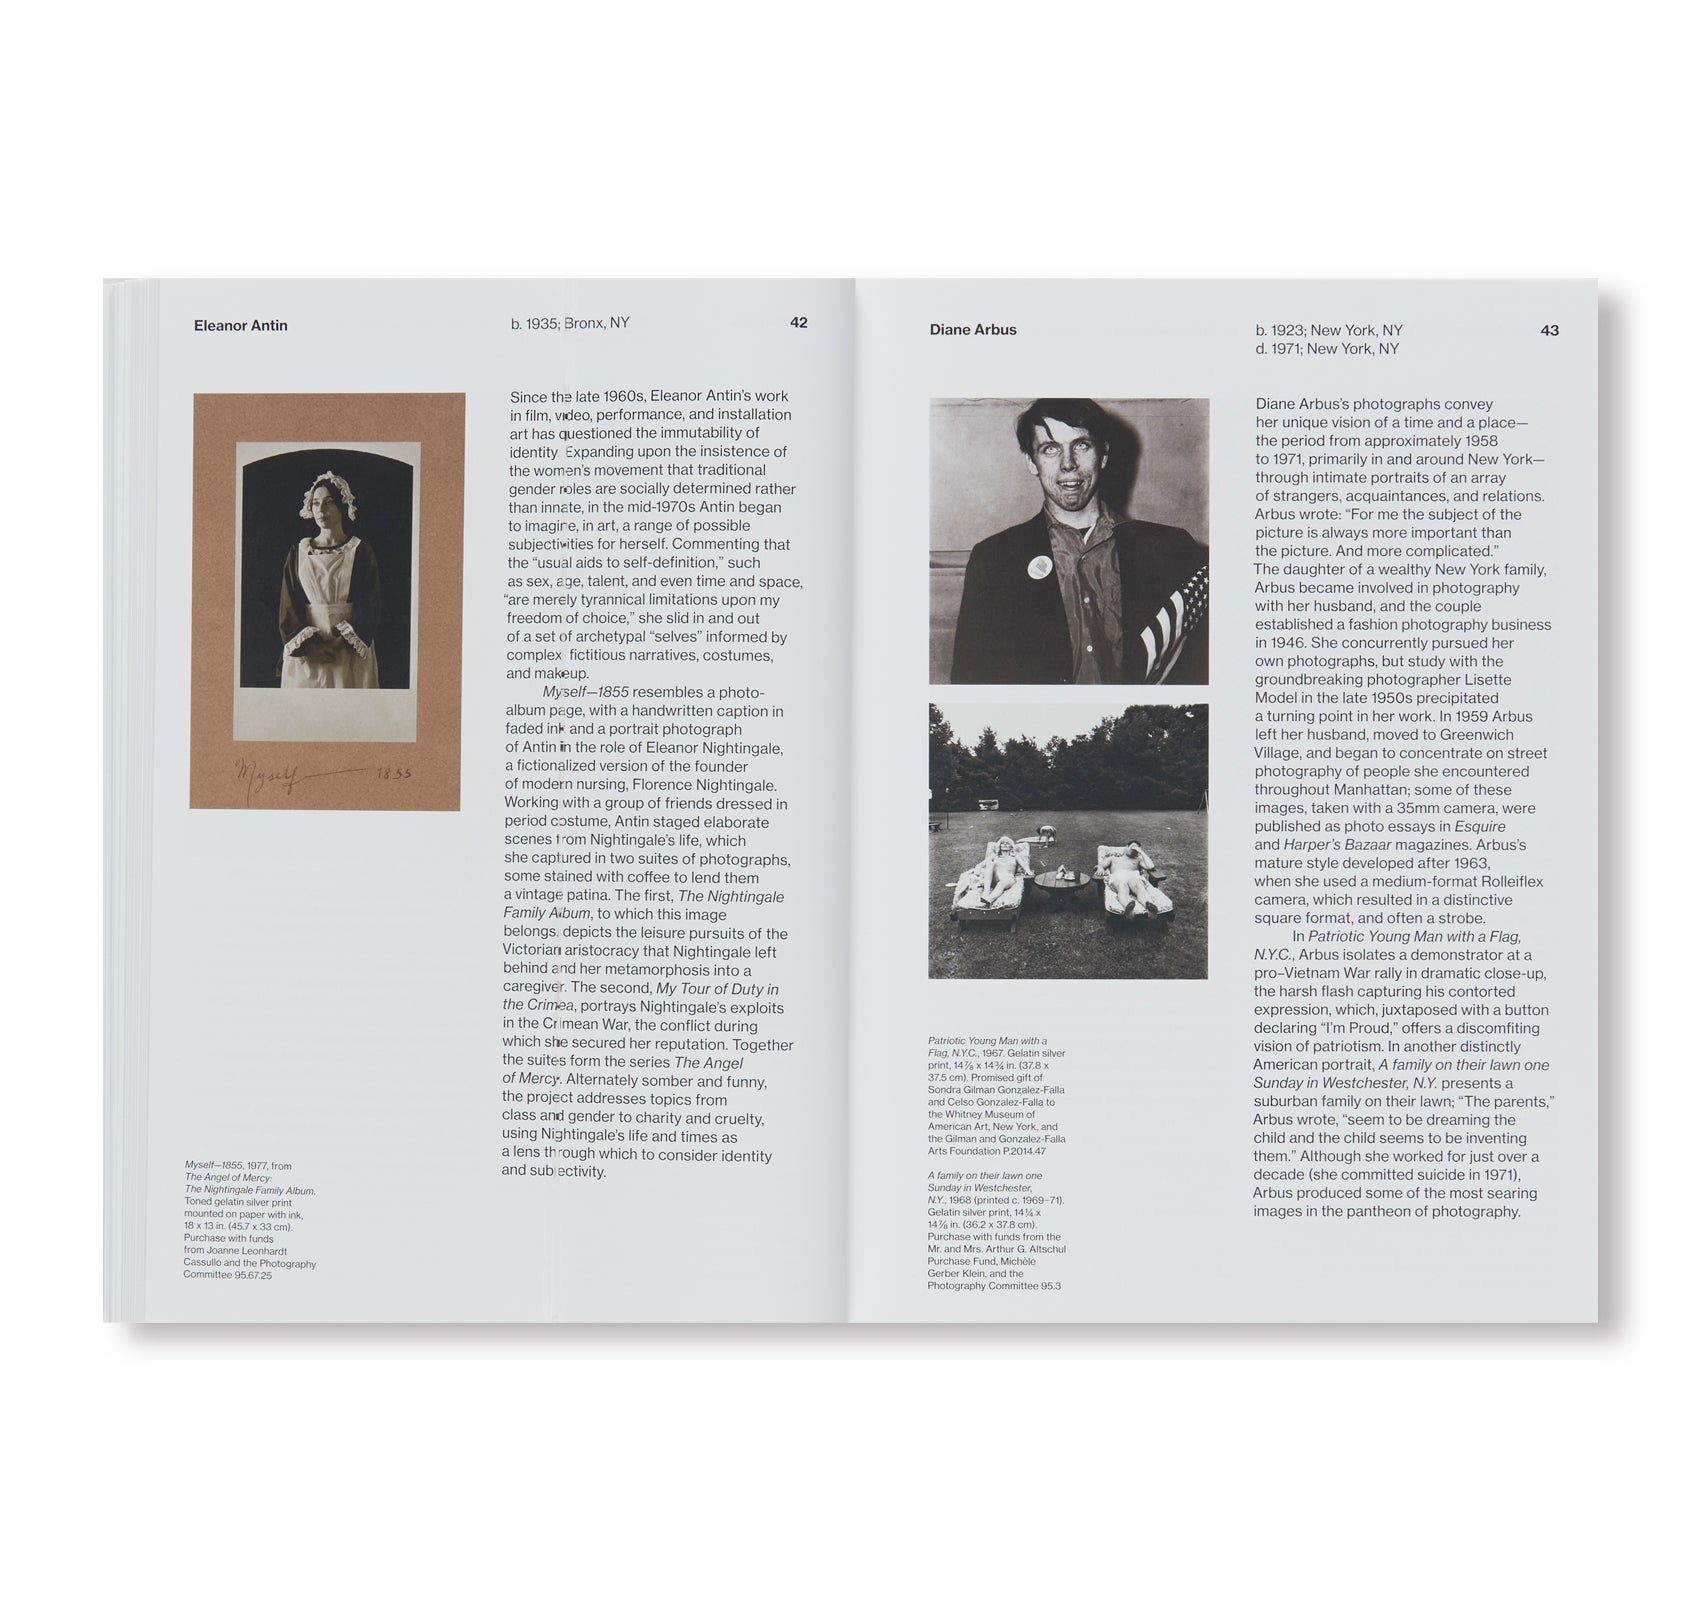 WHITNEY MUSEUM OF AMERICAN ART: HANDBOOK OF THE COLLECTION